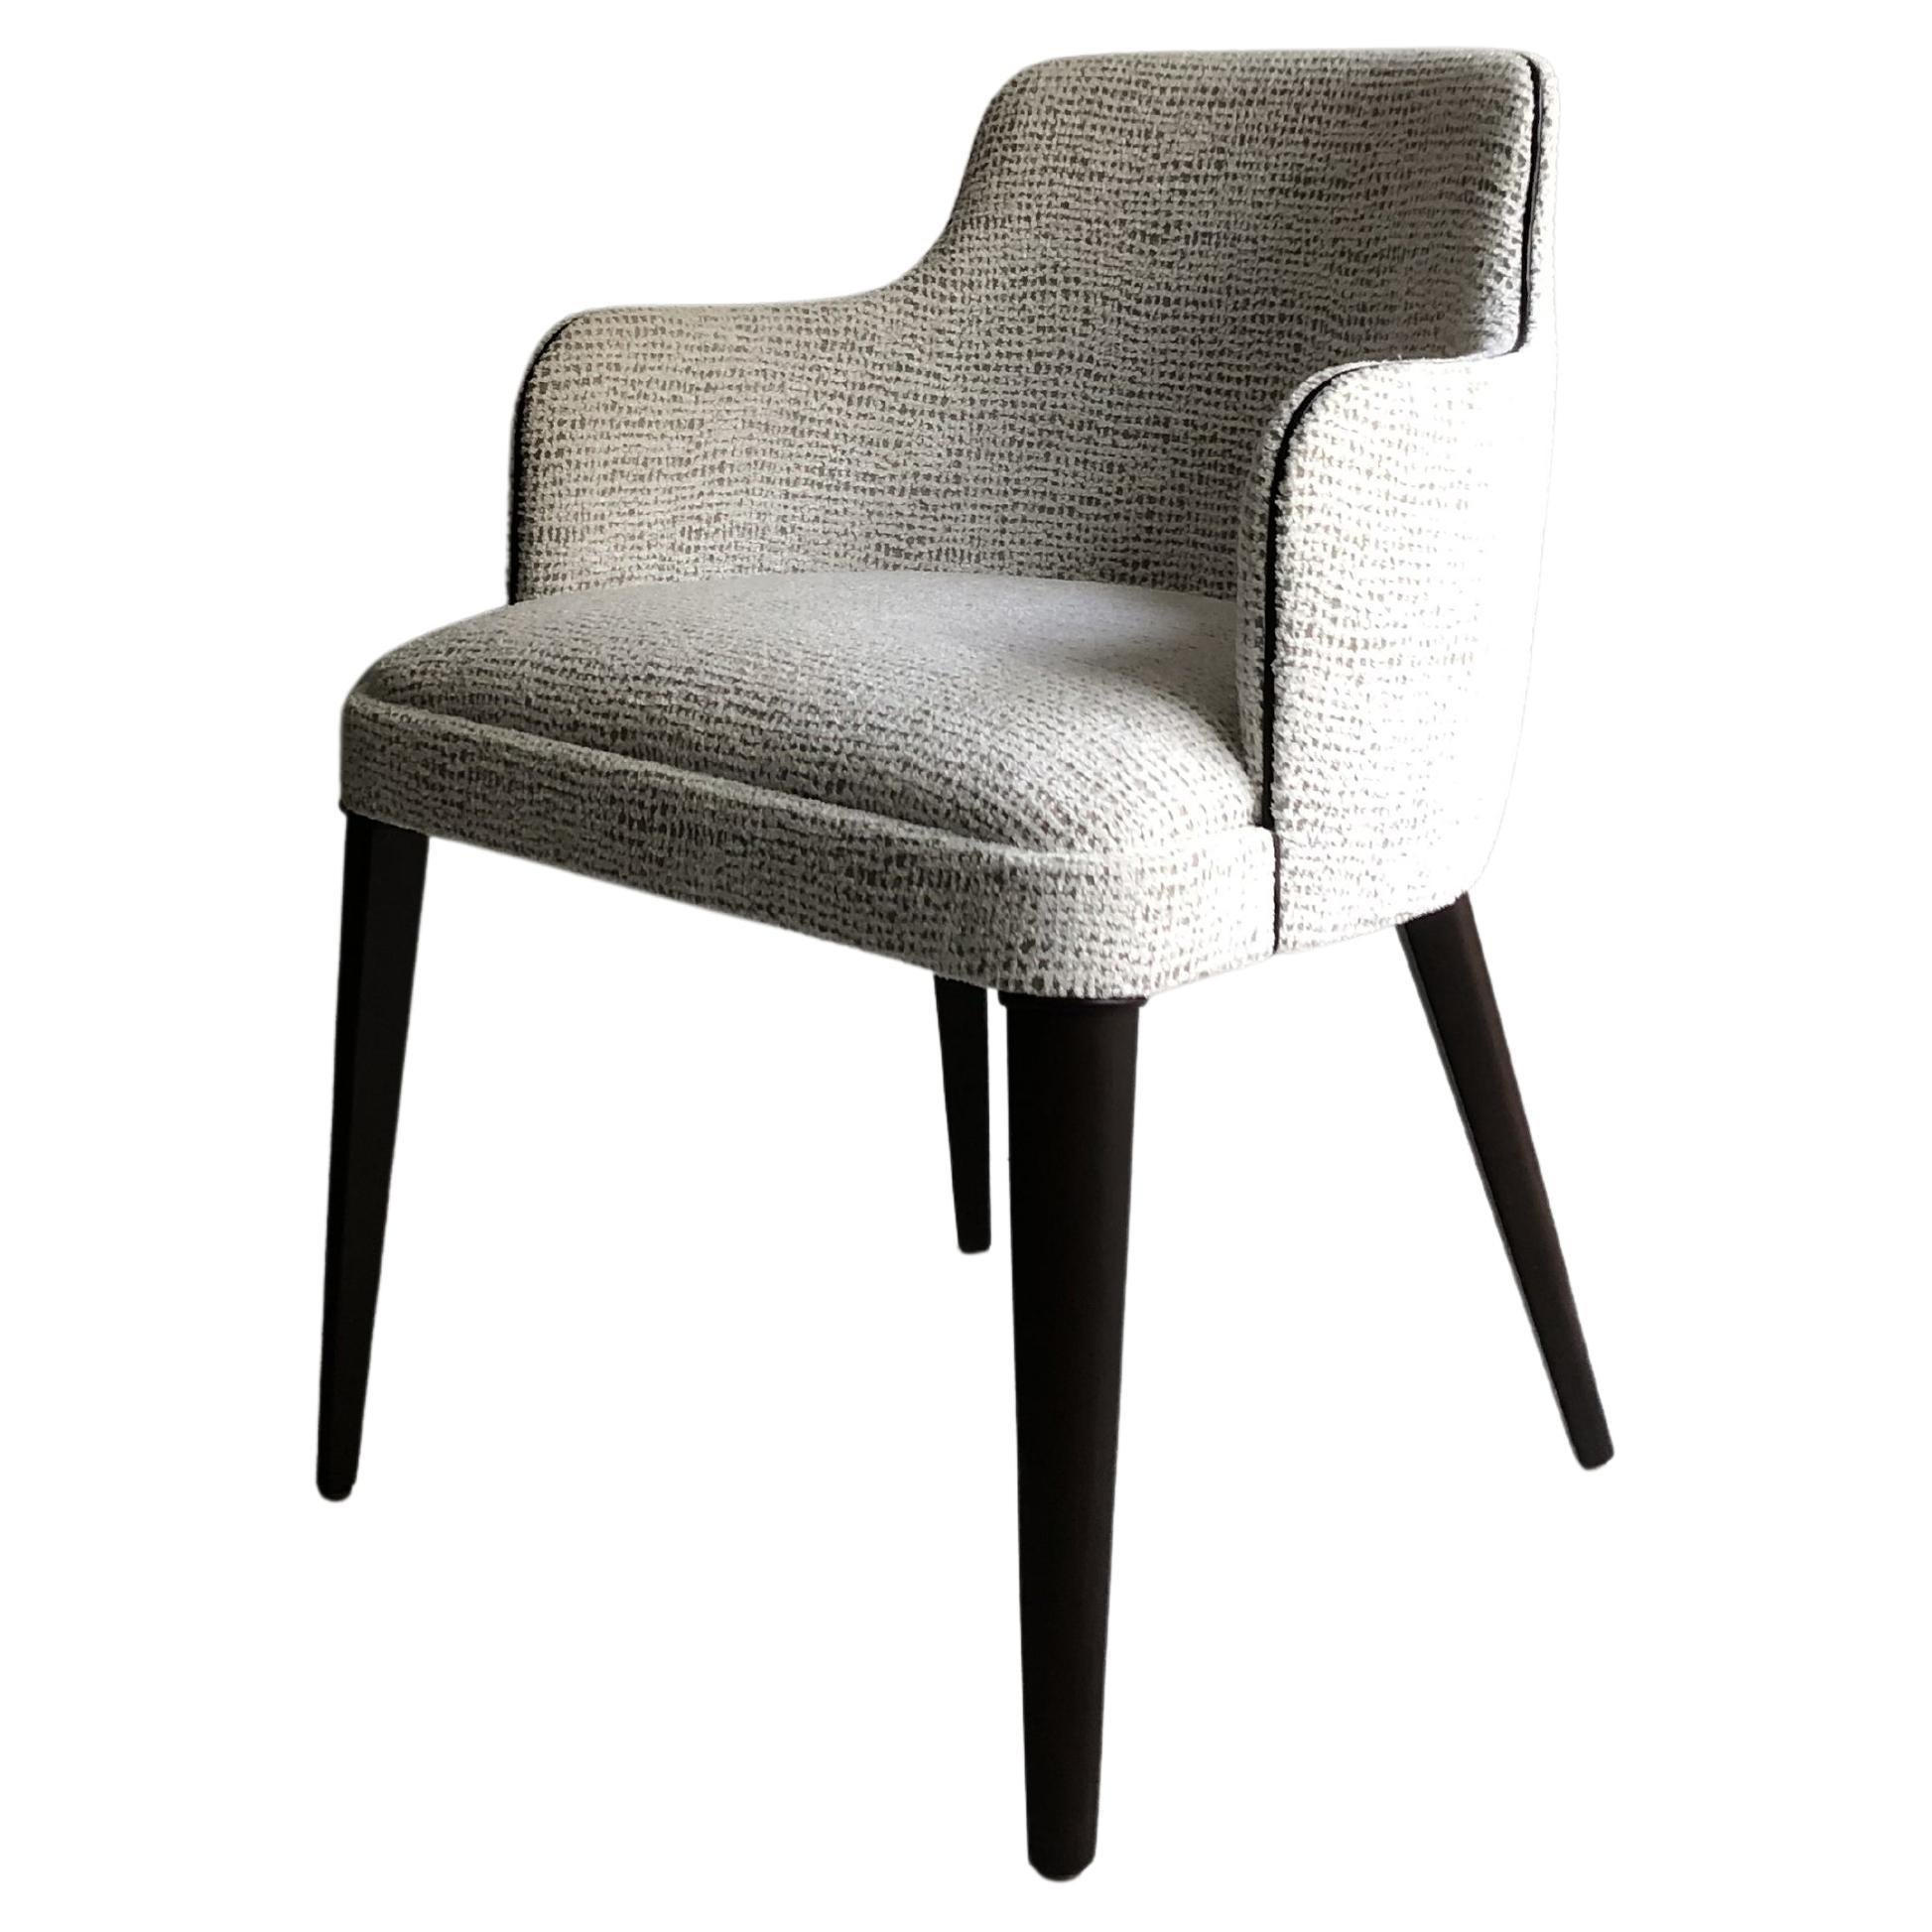 Lola, the Comfortable Padded Armchair with Wood Legs For Sale